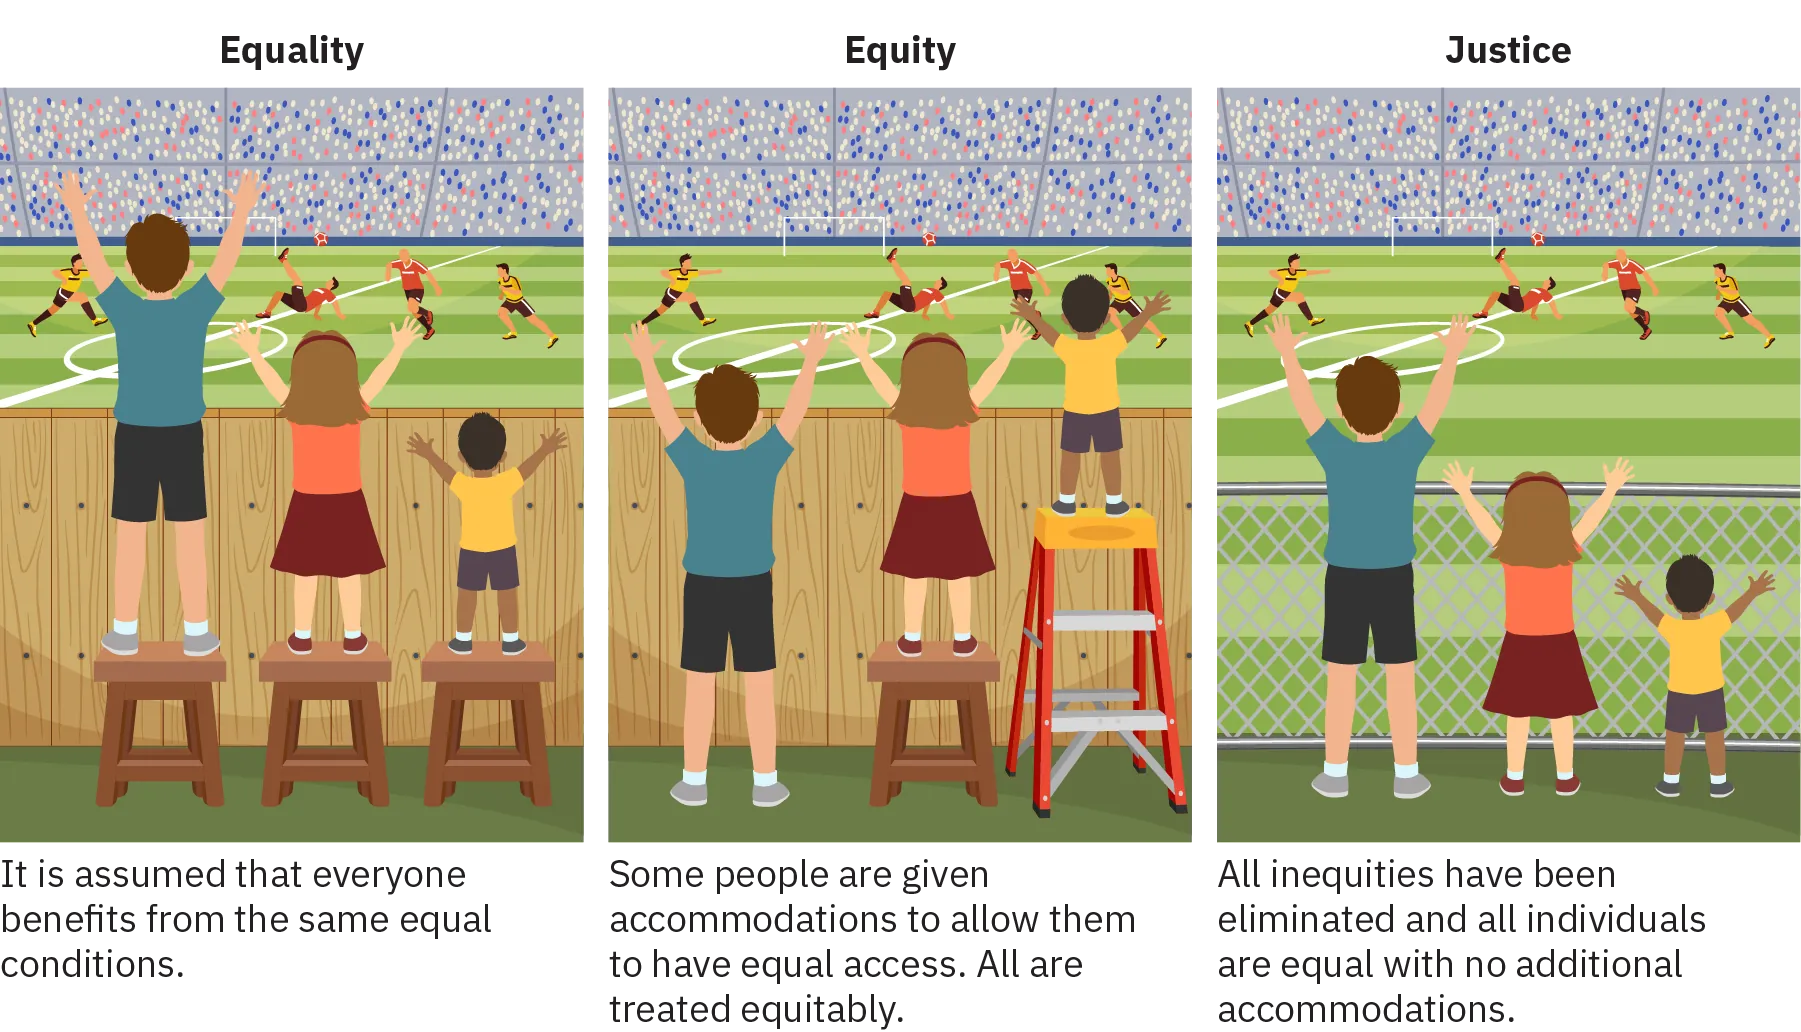 Three panels of text and images. 1) Panel one is labelled “Equality” and shows three children of varying height standing on benches of equal height behind a solid wooden fence. The tallest and second tallest child can easily see over the fence, but the shortest child cannot. 2) In panel two, labelled “Equity”, each child can see over the fence. The tallest child stands on the ground, the second tallest on a stool, and the shortest on a small ladder. 3) In panel three, labelled “Justice”, all three children stand in front of a chain link fence through which each can see without changing their elevation.